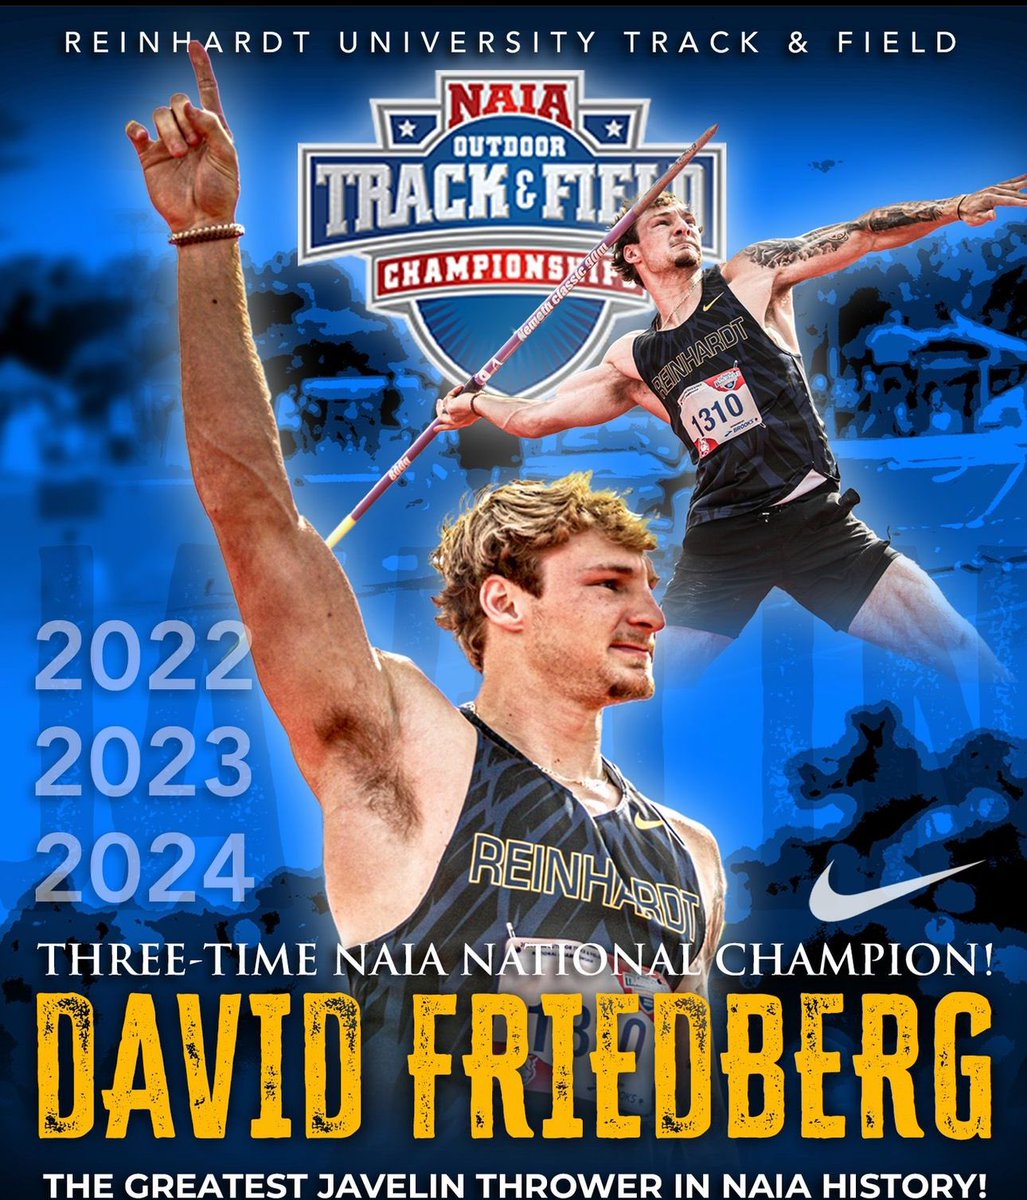 Reinhardt’s own - DAVID FRIEDBERG - becomes a THREE-TIME NAIA Champion with a throw of 71.88 meters!! He finishes his college track & field career as one of the greatest track & field athletes in Reinhardt history and the All-Time top Javelin Thrower in the NAIA! #24Teams1RU🦅